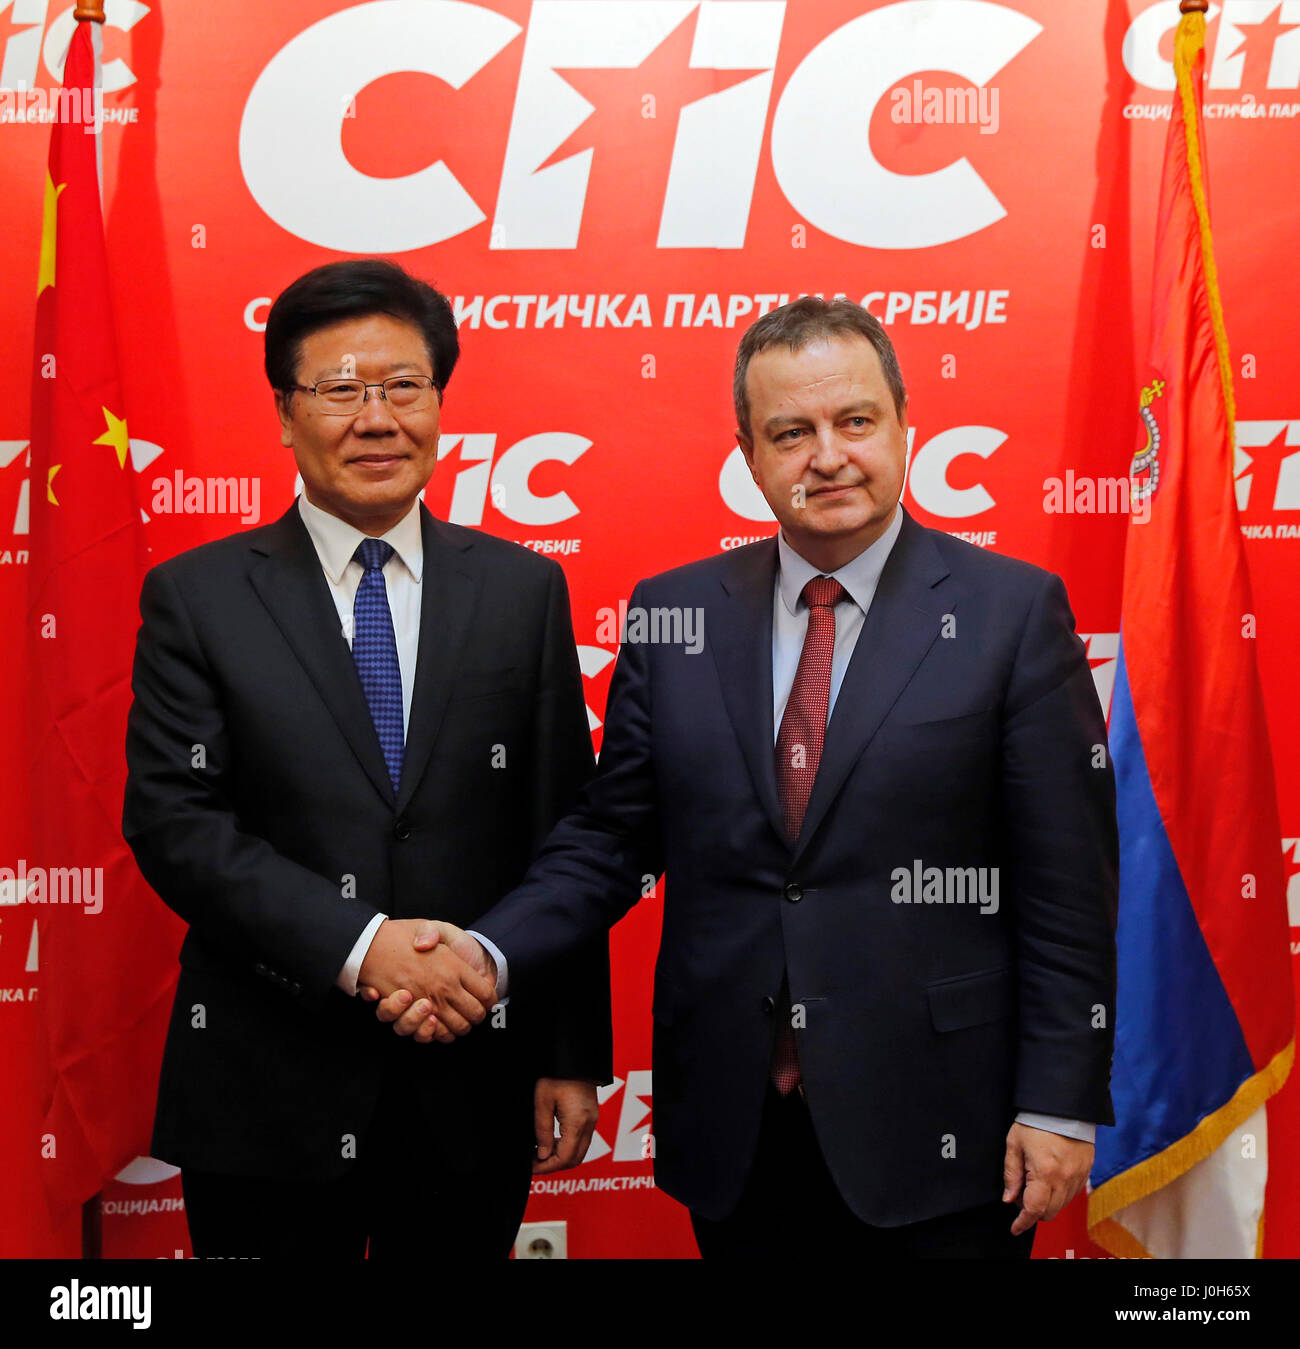 Belgrade, Serbia. 13th Apr, 2017. Zhang Chunxian (L), member of the Political Bureau of the Communist Party of China (CPC) Central Committee, meets with Serbian Foreign Minister and the leader of the Socialist Party Ivica Dacic, in Belgrade, Serbia, on April 13, 2017. Credit: Predrag Milosavljevic/Xinhua/Alamy Live News Stock Photo